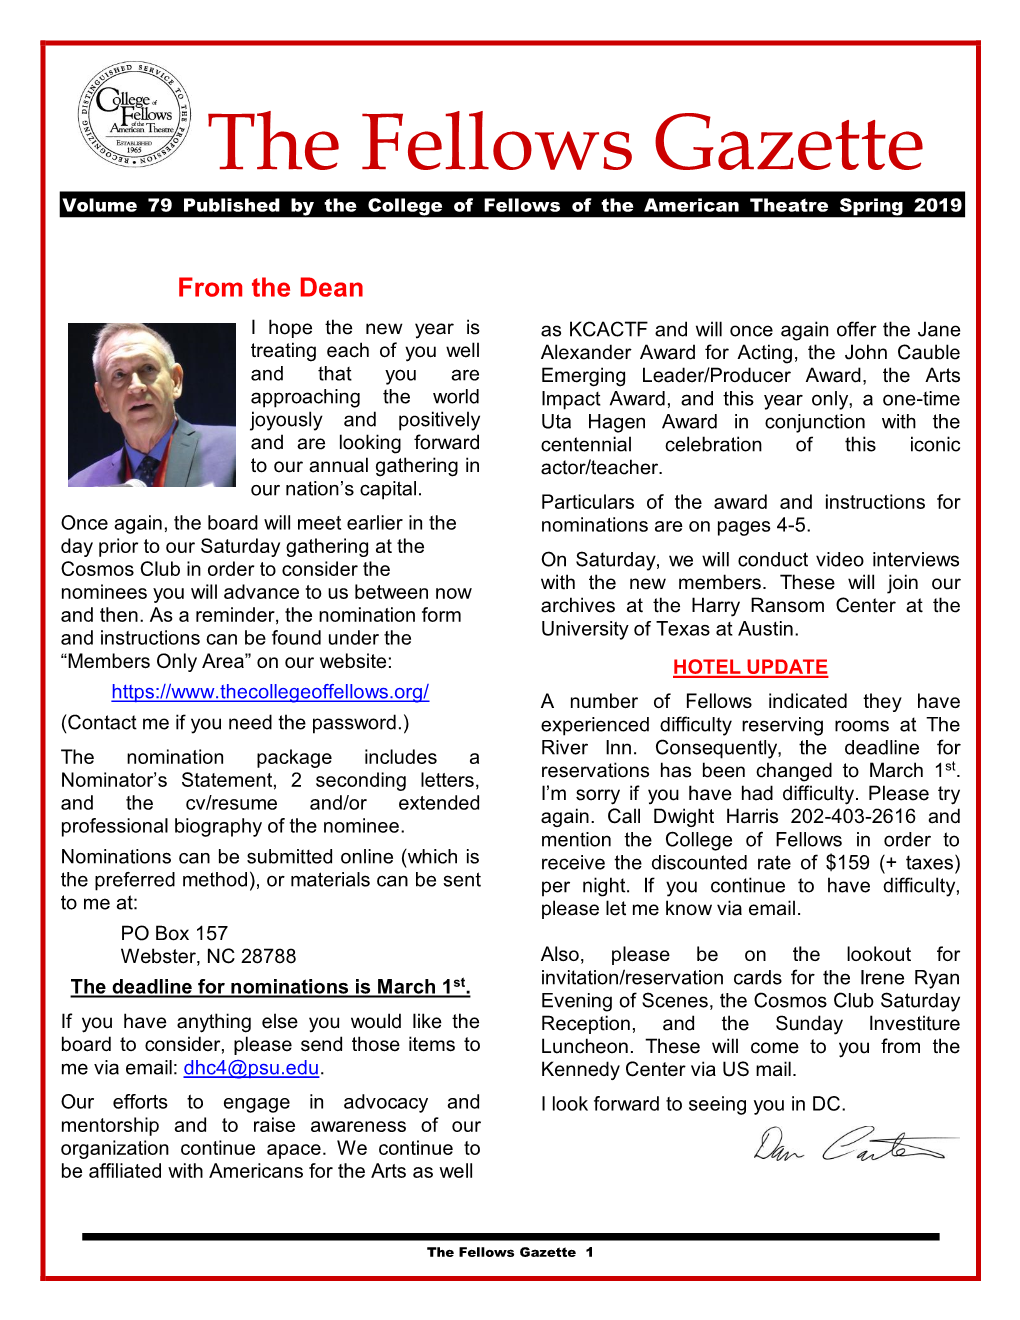 The Fellows Gazette Volume 79 Published by the College of Fellows of the American Theatre Spring 2019